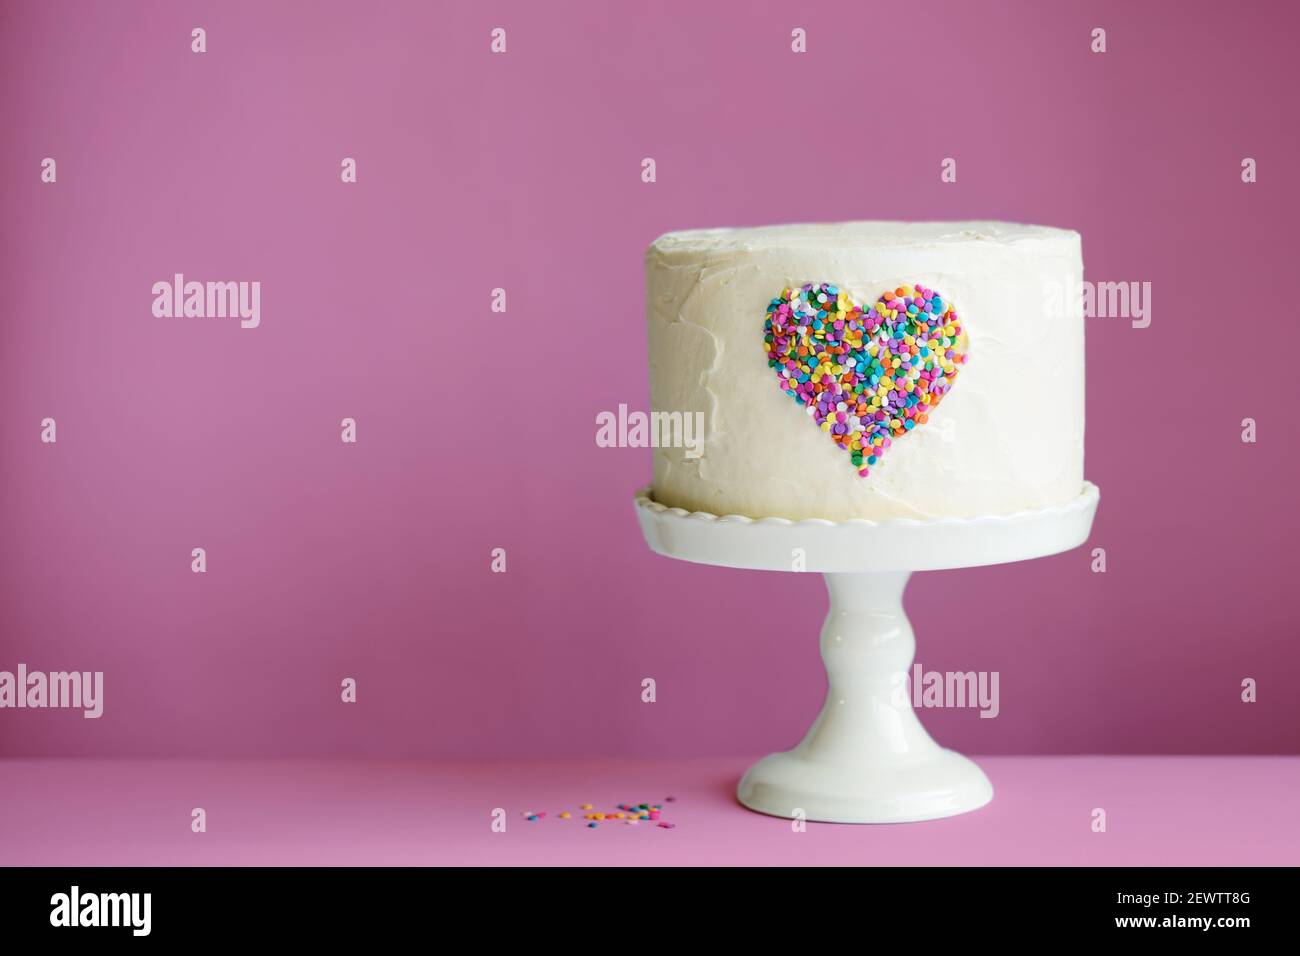 White Valentines cake with colorful heart made of sprinkles on a pink background Stock Photo